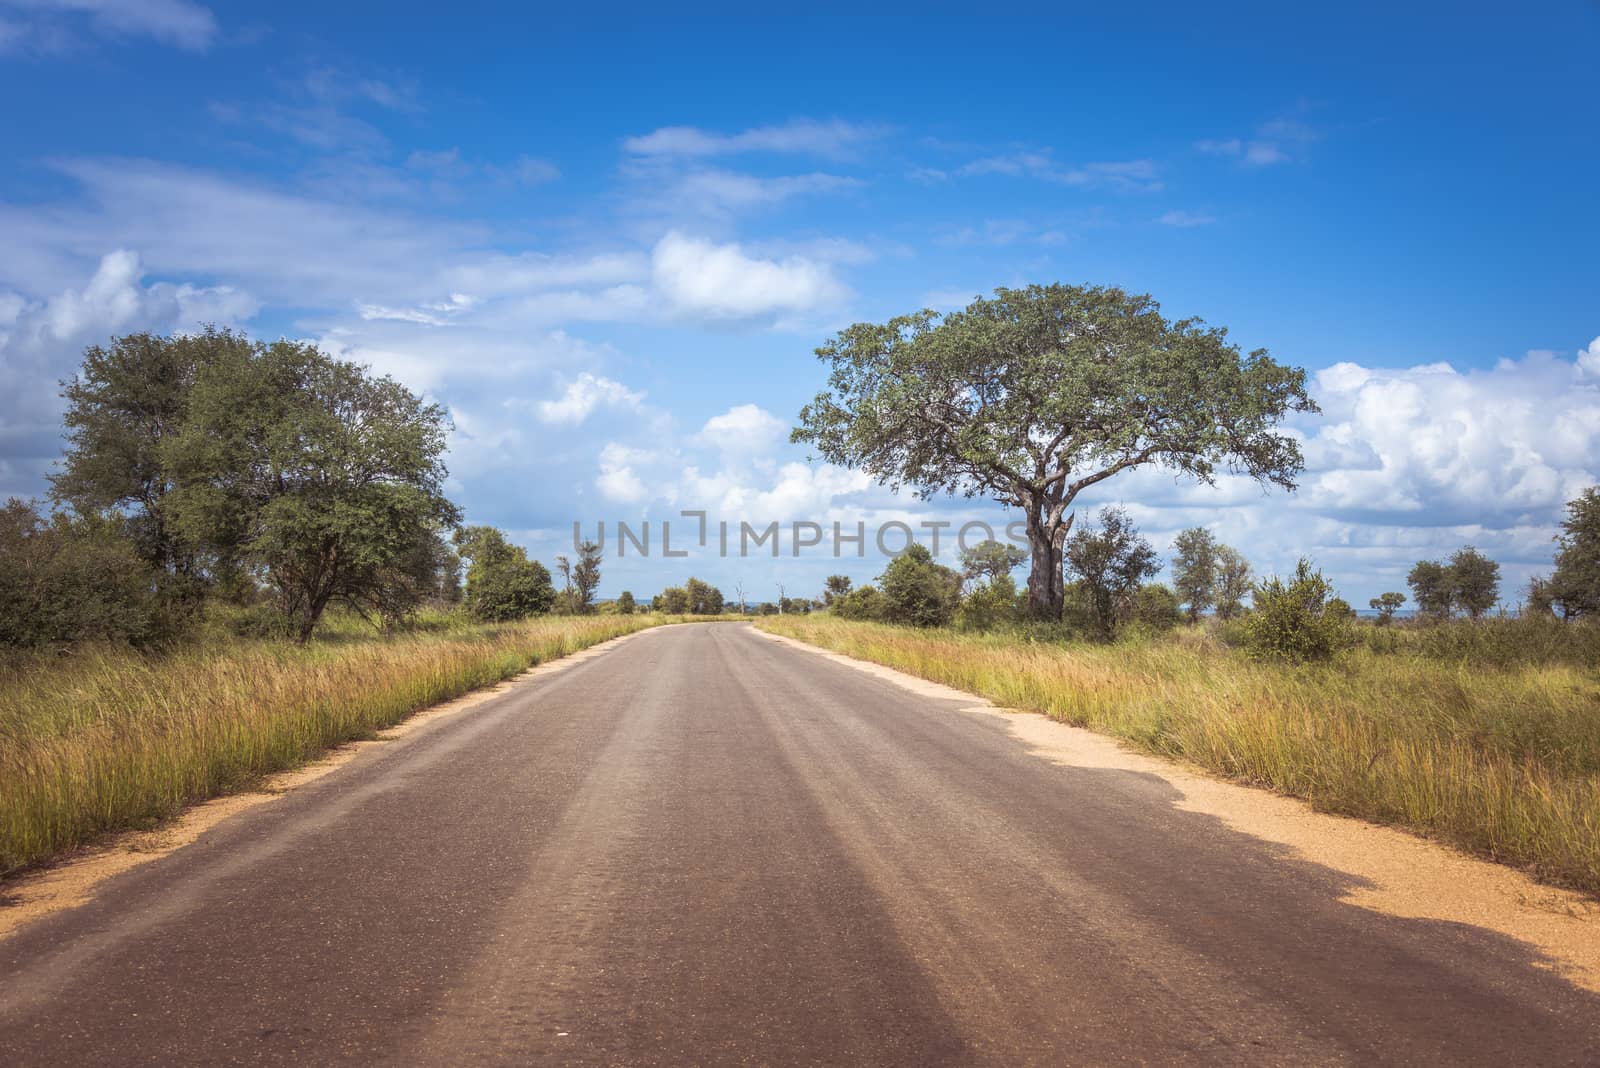 road in the kruger national park in south africa by compuinfoto